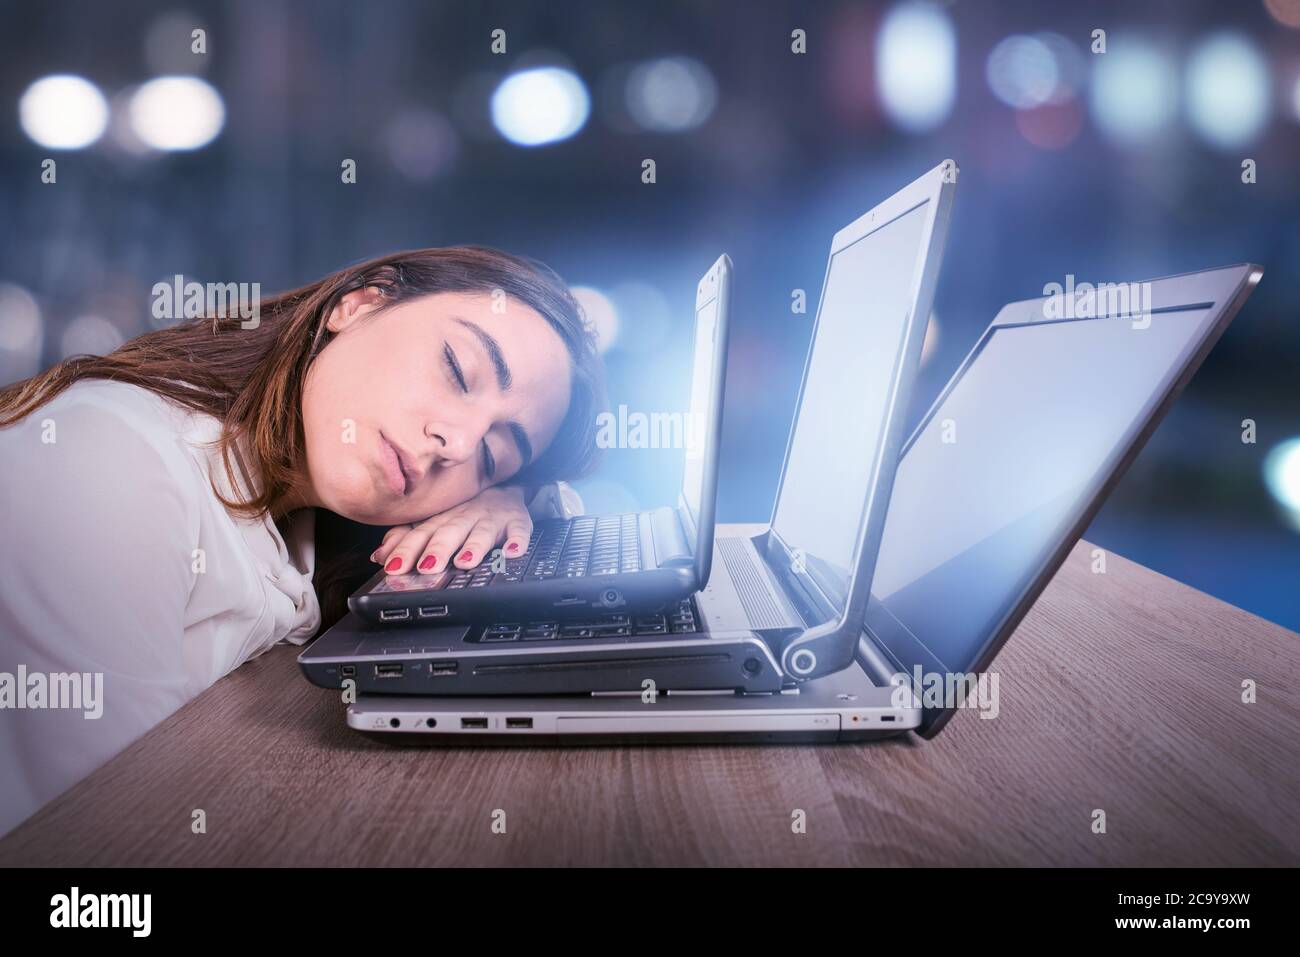 Businesswoman is tired due to too much work. Concept of stress and overwork Stock Photo